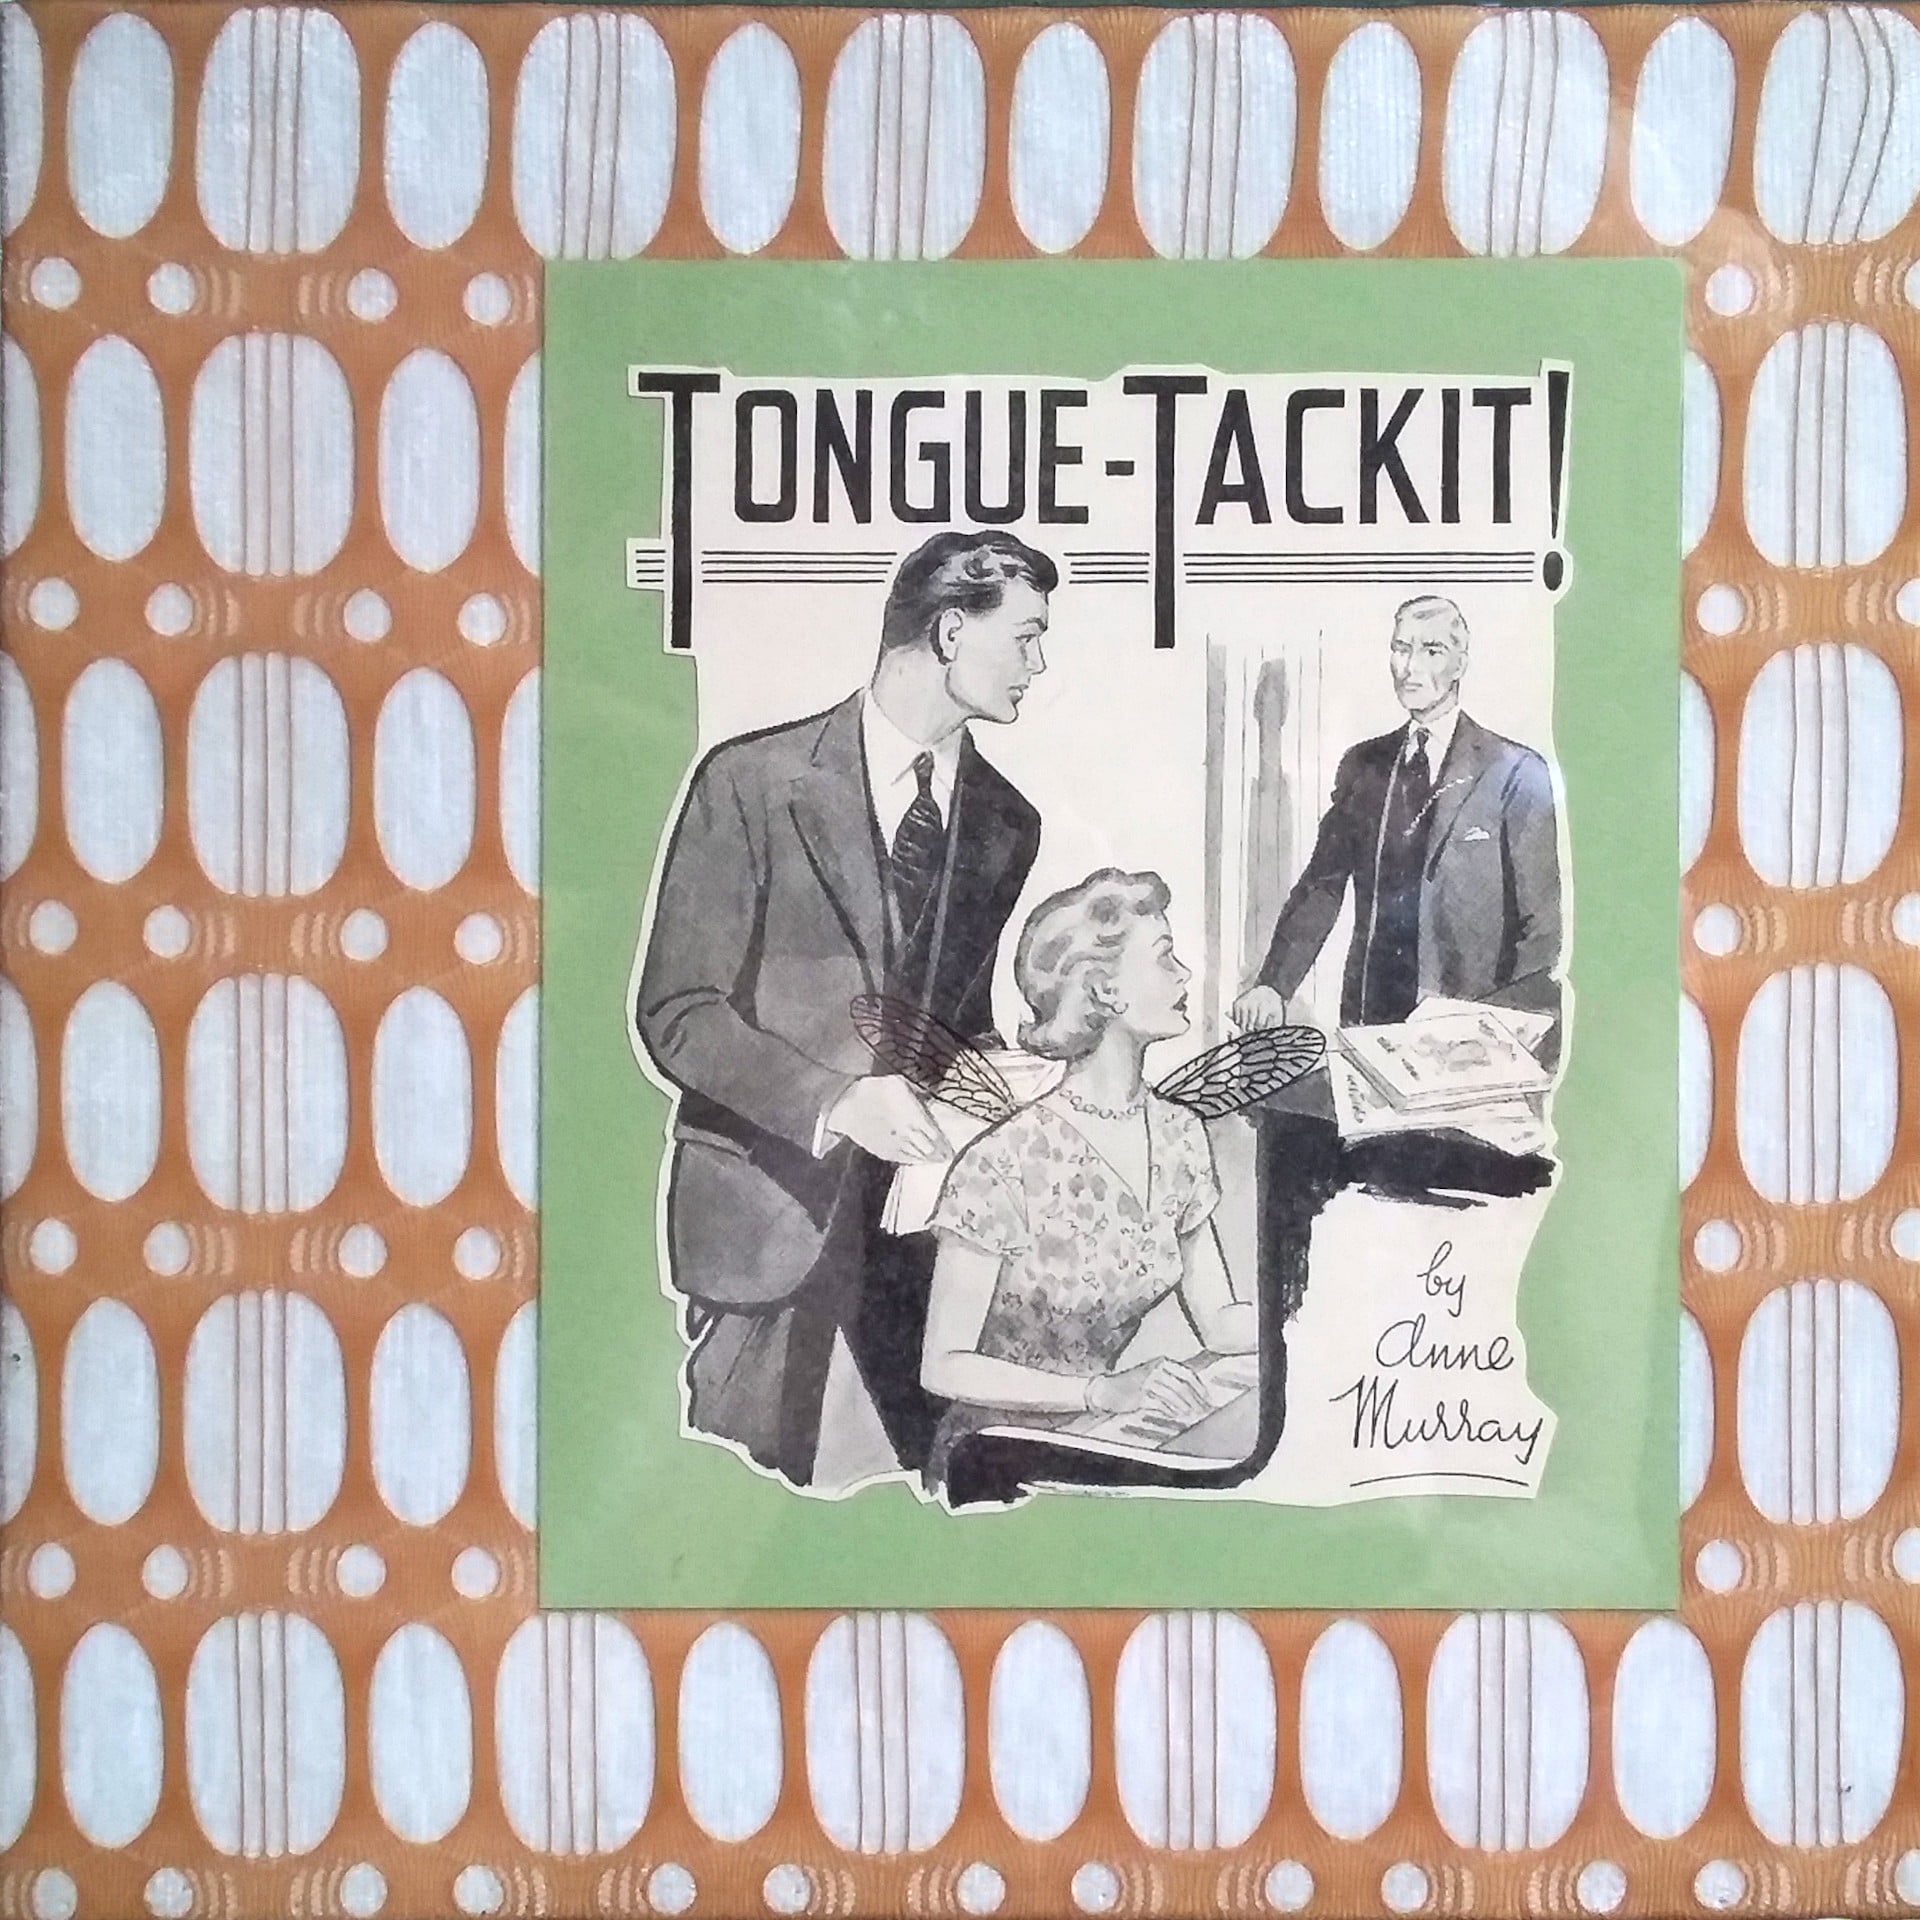 "Tongue-Tackit" by Libby Bloxham. A vintage book illustration is layered over sage green card and orange-and-white vintage fabric, to create a square collage. The illustration depicts a woman playing a piano with a suited man standing over her holding sheets of paper. They seem concerned as they look toward a second suited man, standing in the doorway. The printed title reads 'Tongue-Tackit by Anne Murray'. Acetate insect wings have been added to the woman's back.